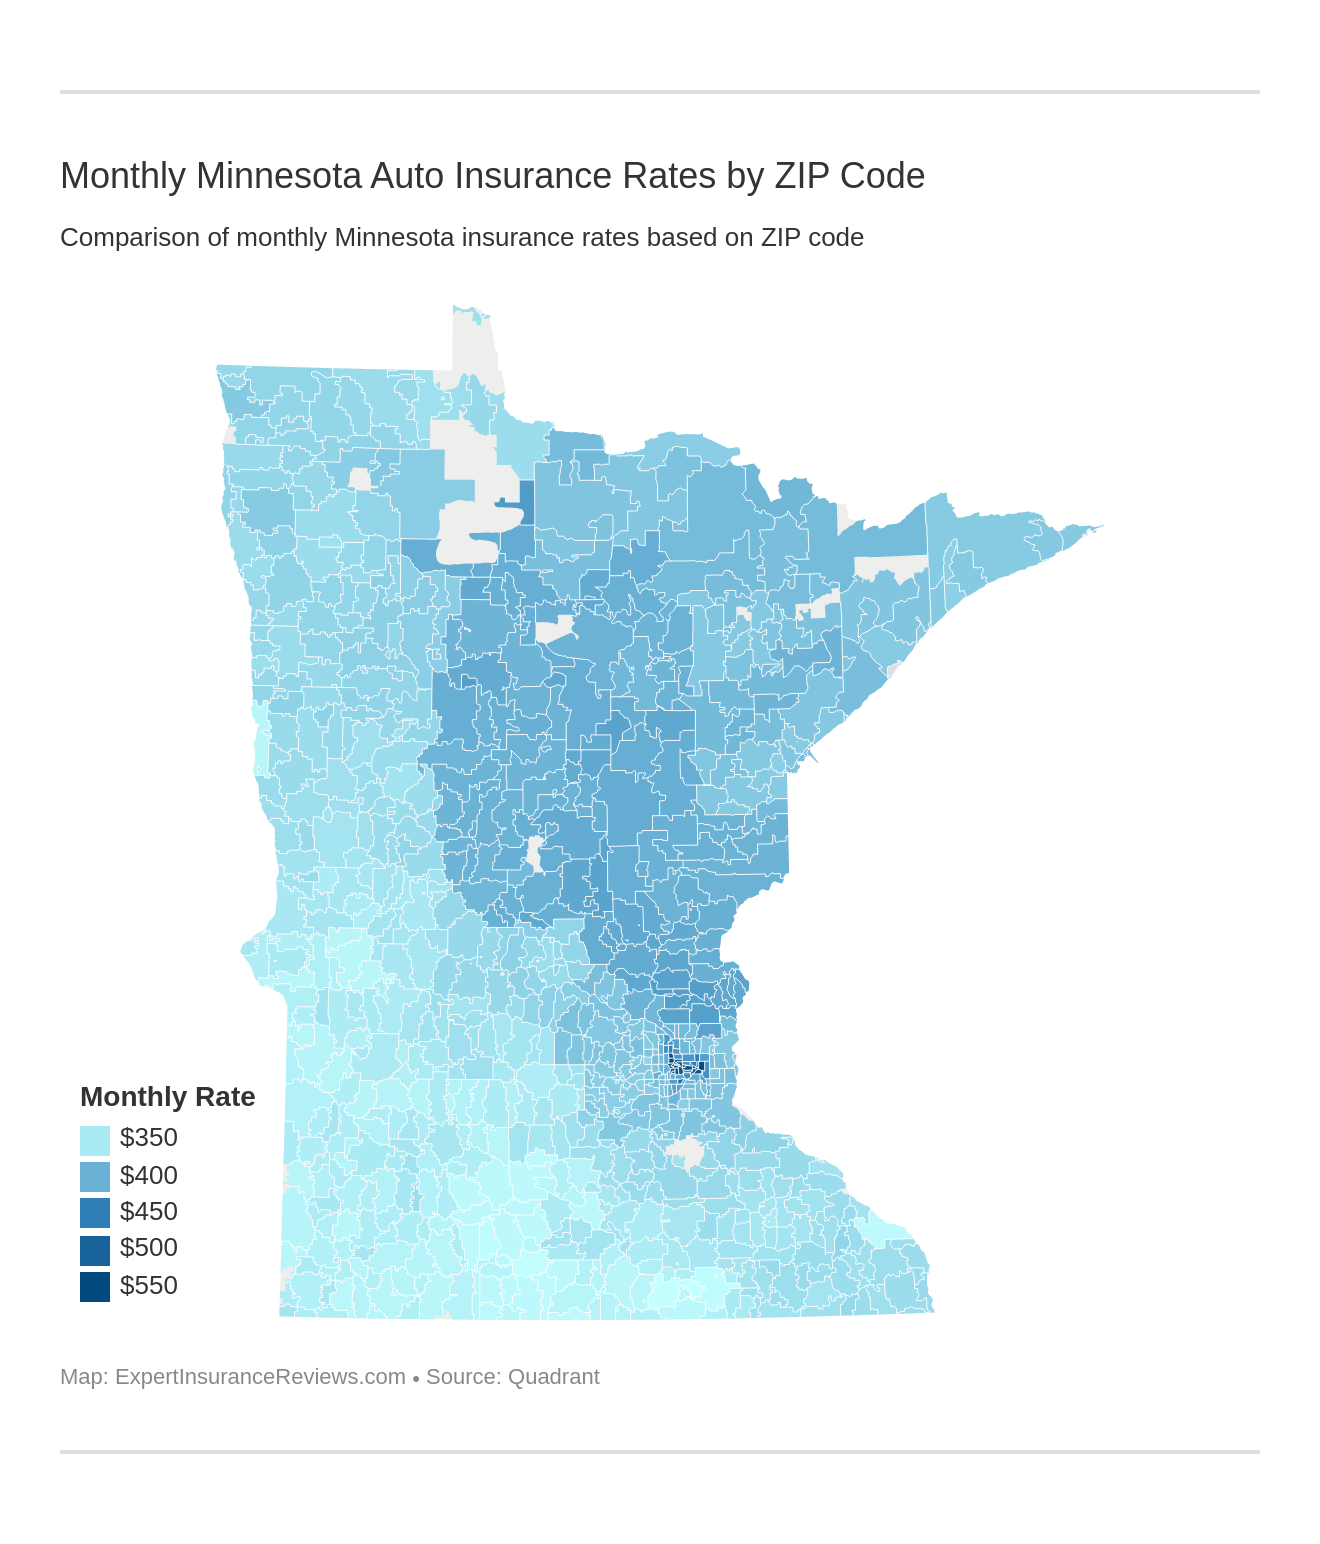 Monthly Minnesota Auto Insurance Rates by ZIP Code